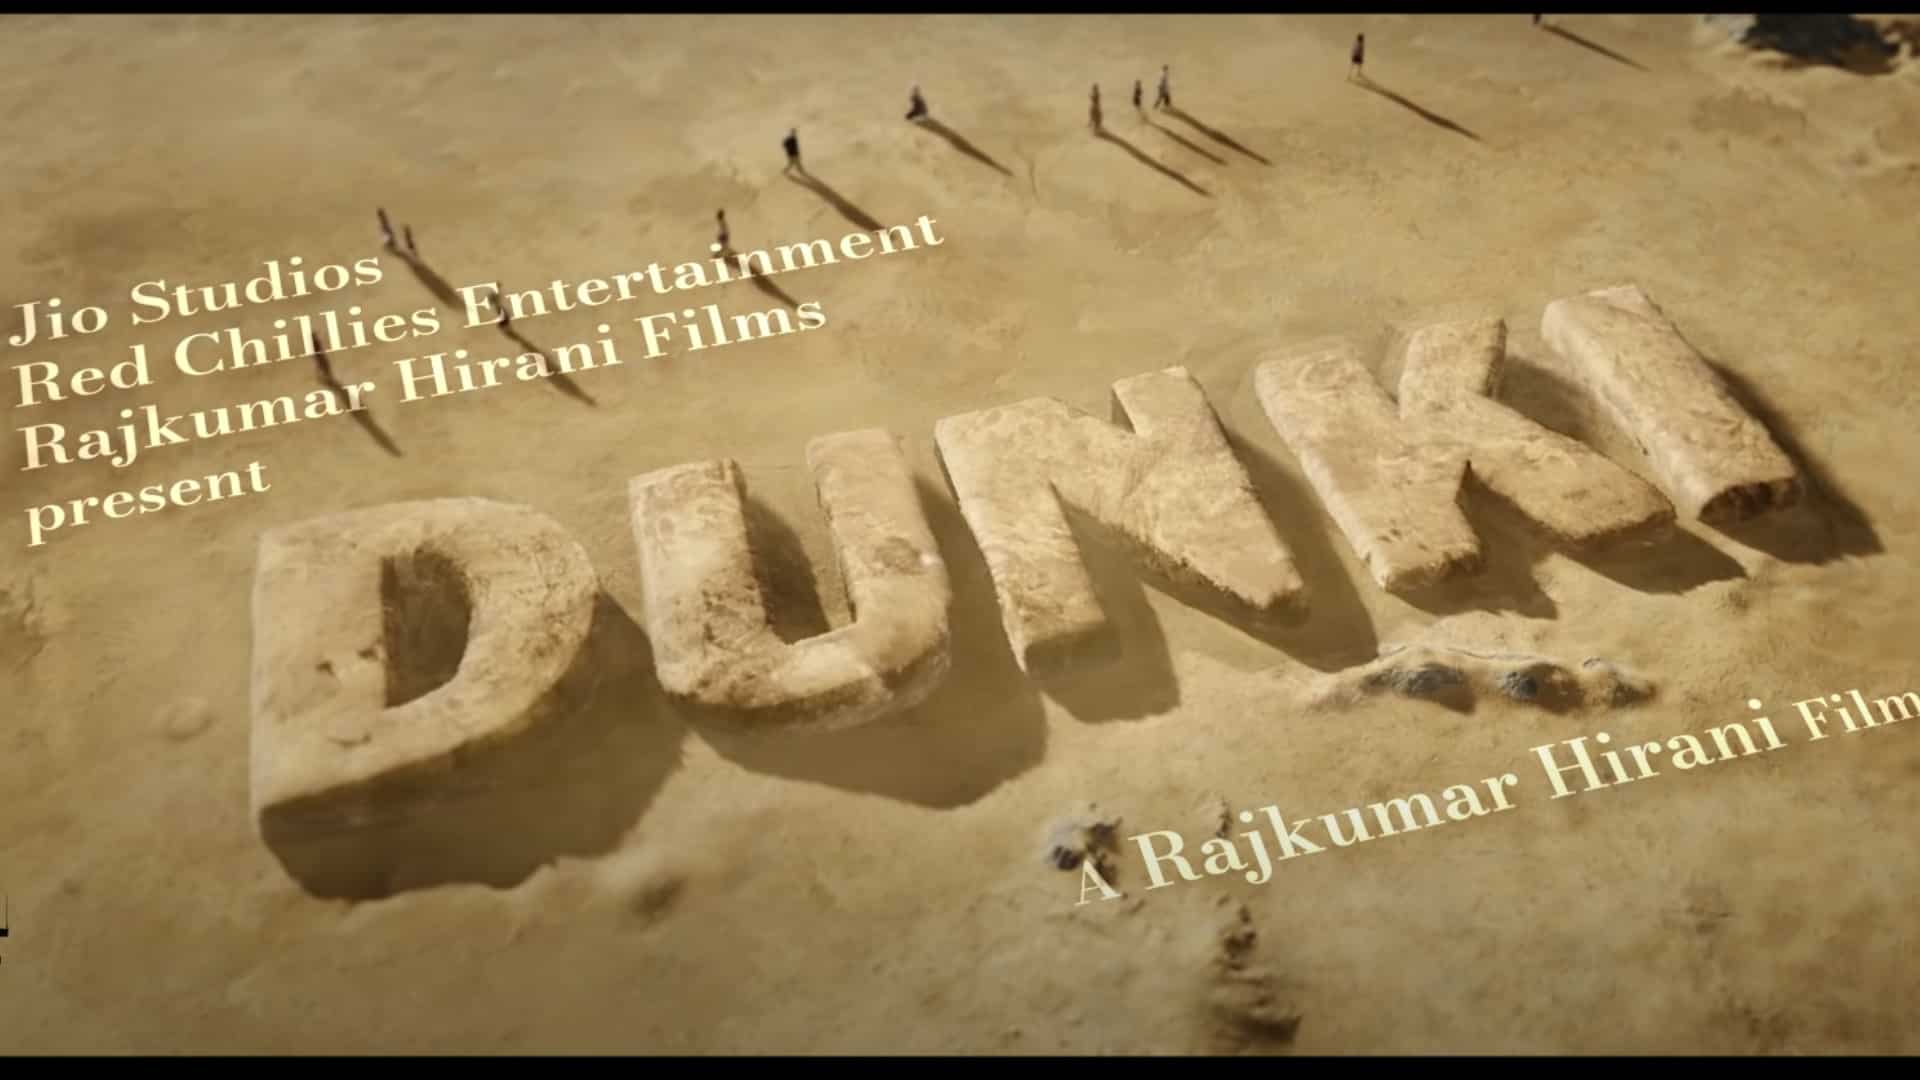 When will Dunki be released on the big screen?